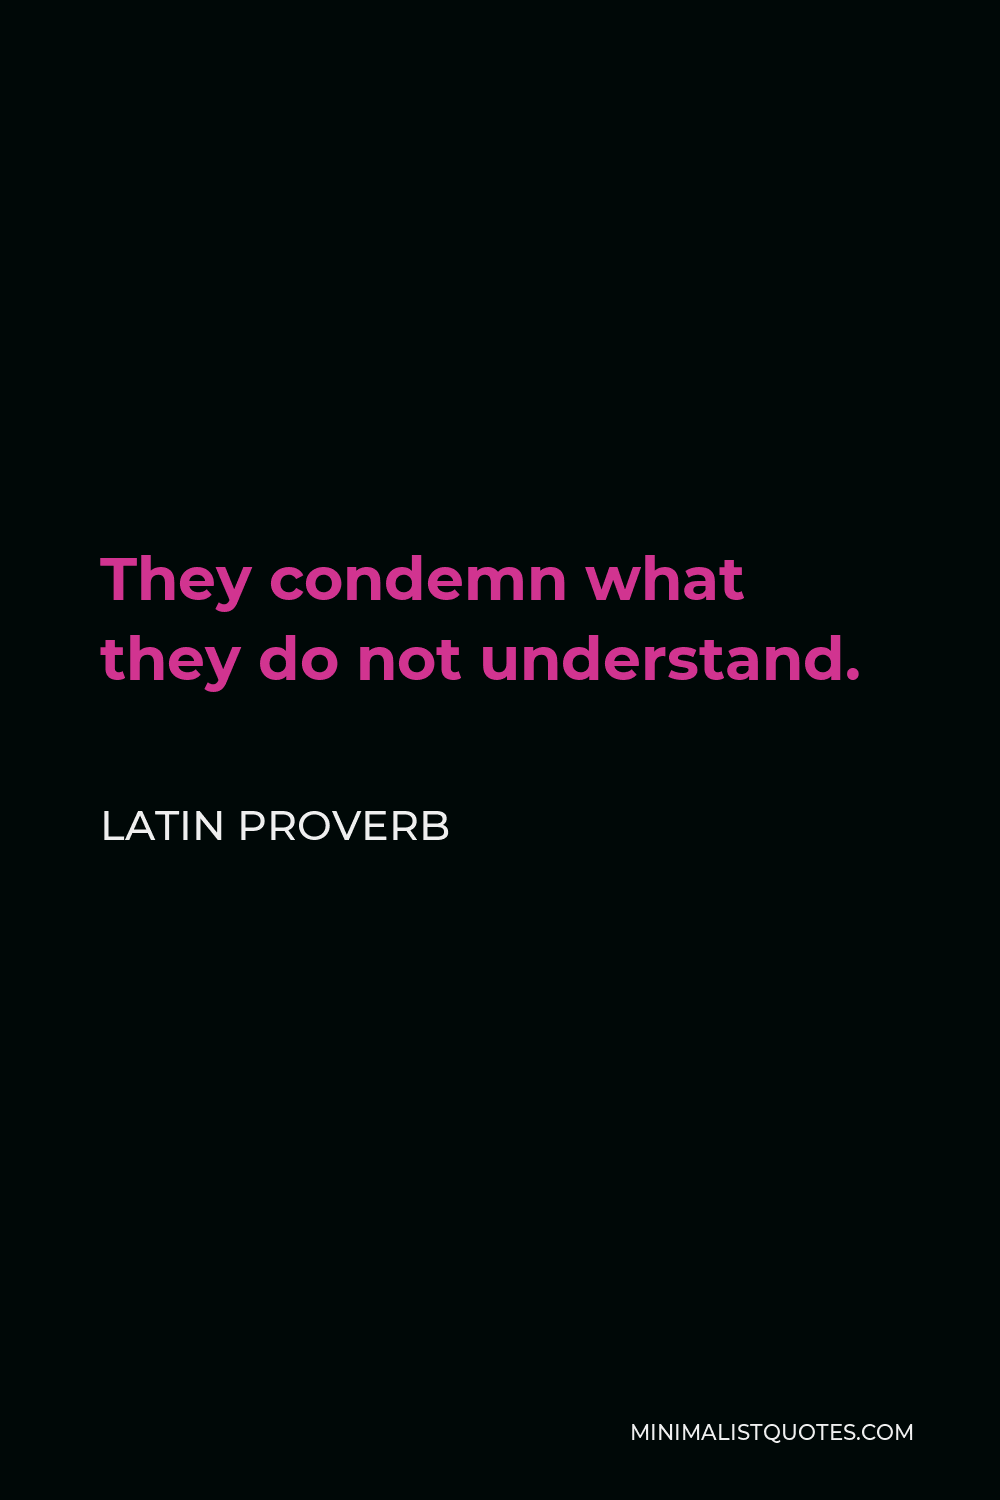 Latin Proverb Quote - They condemn what they do not understand.